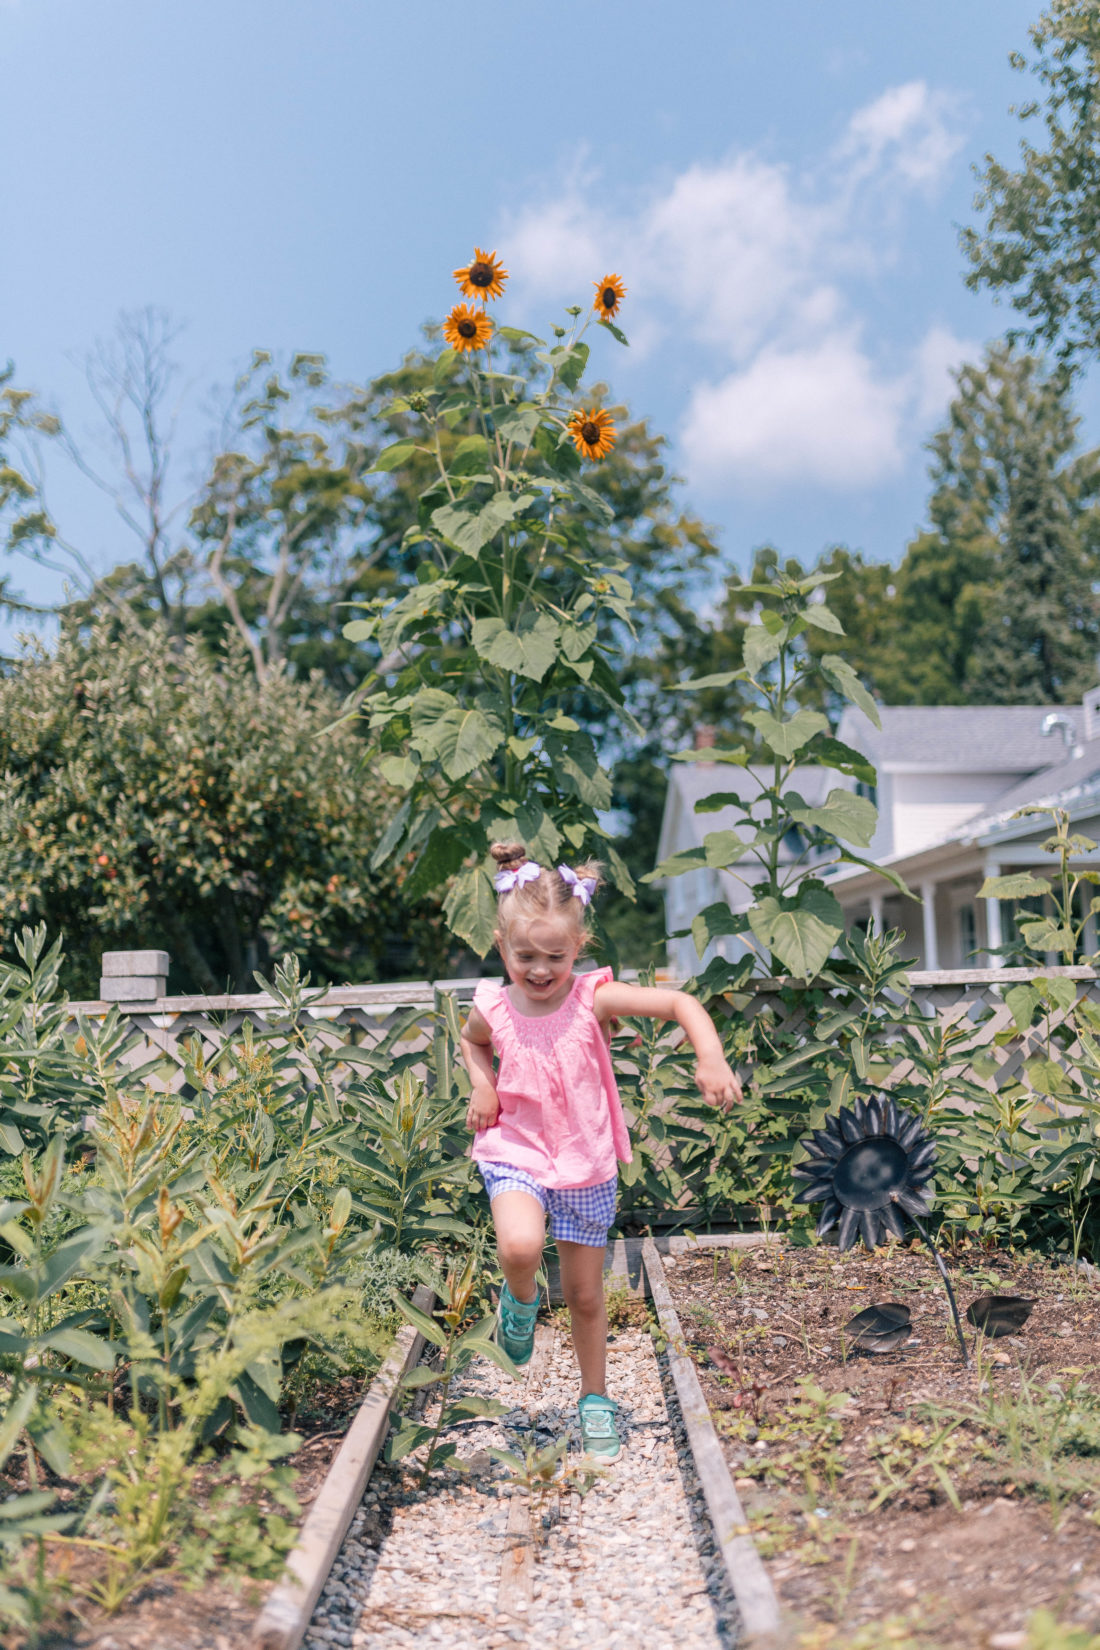 Marlowe Martino wears a pink top and gingham shorts, and picks vegetables in the garden of a local connecticut farm